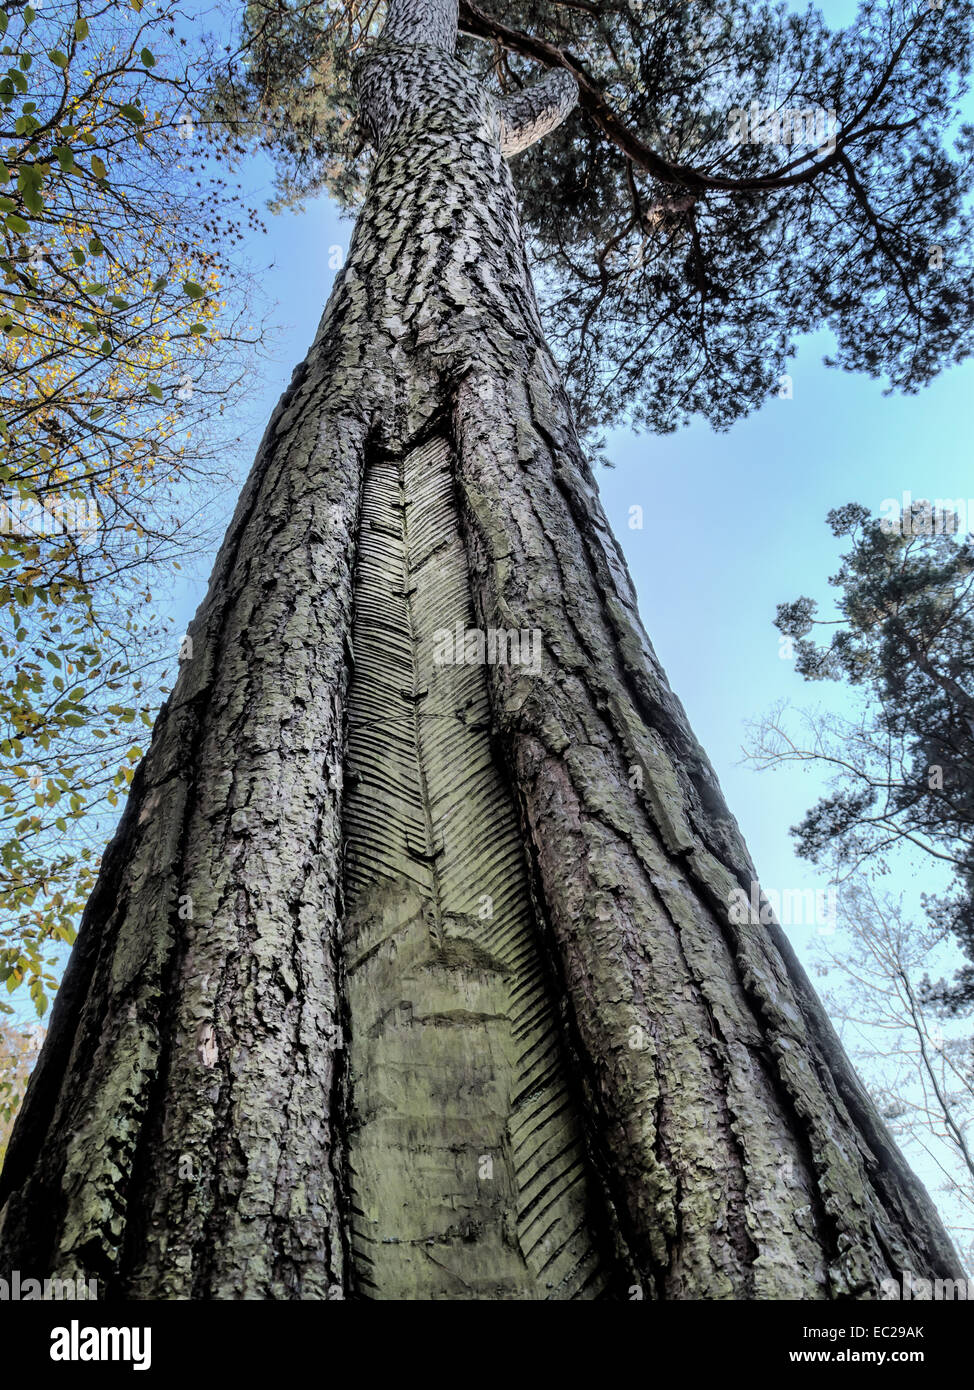 Pine tree trunk with resing incising Stock Photo